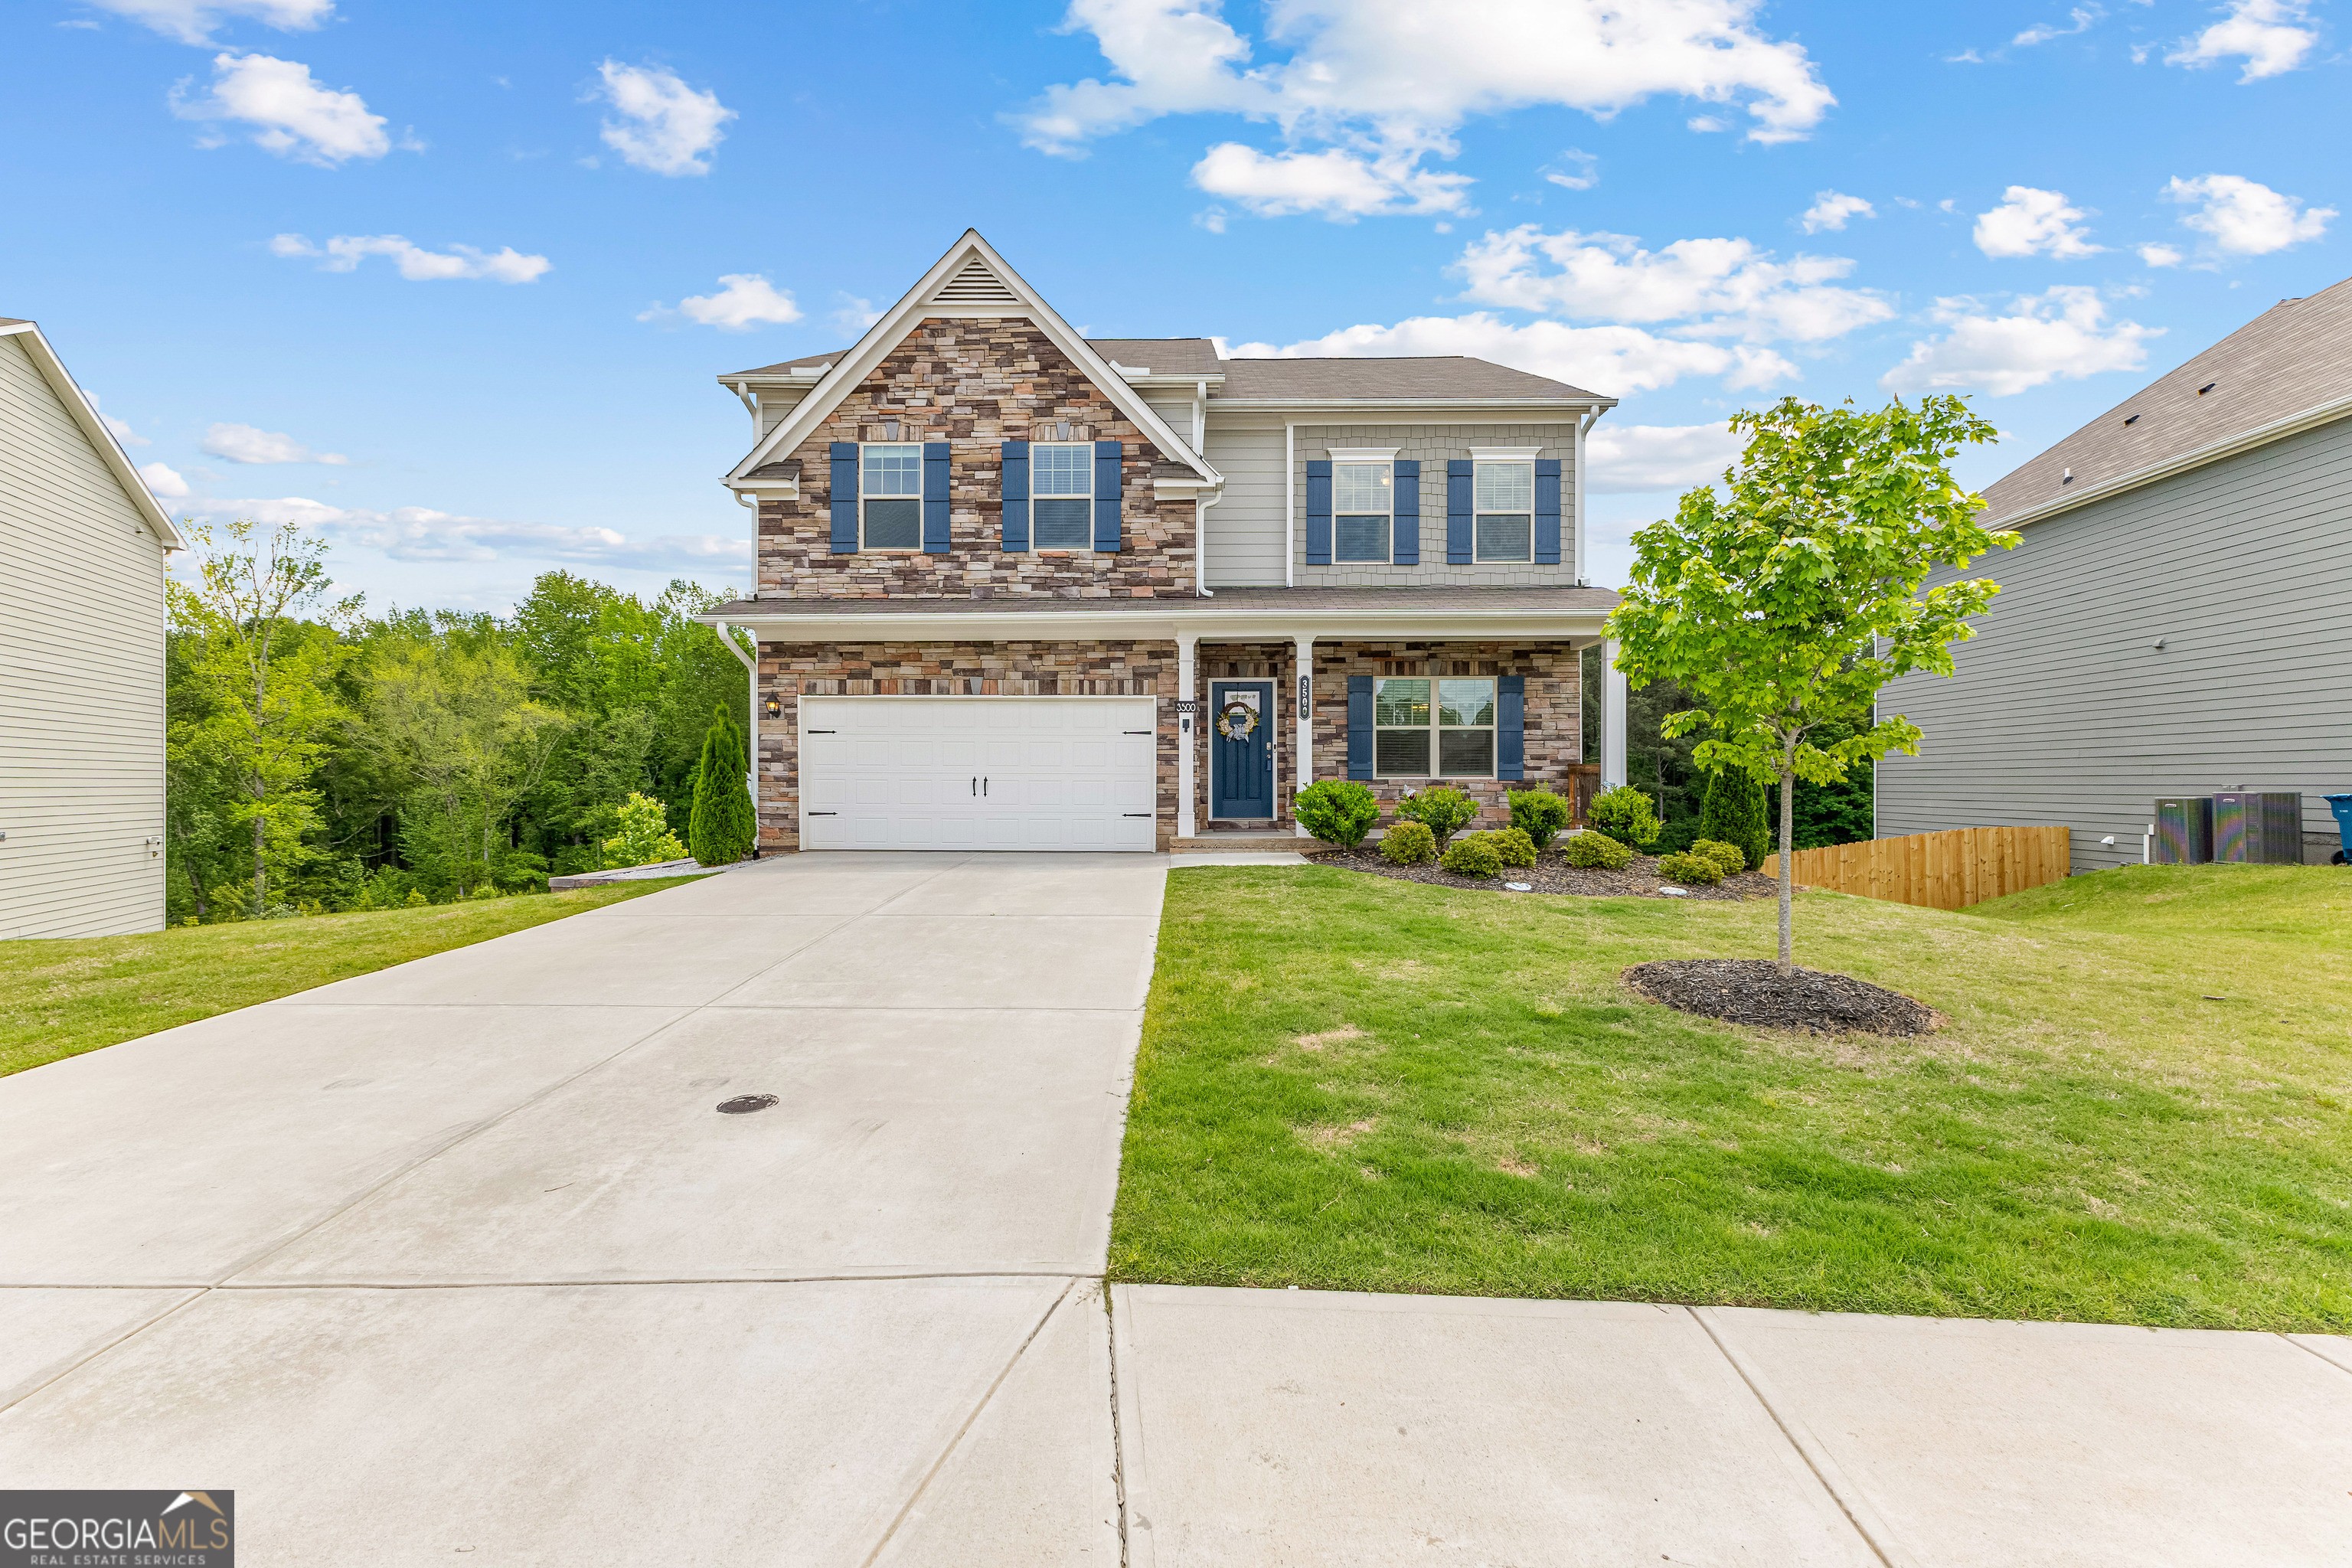 2. 3500 Meadow Grass Dr